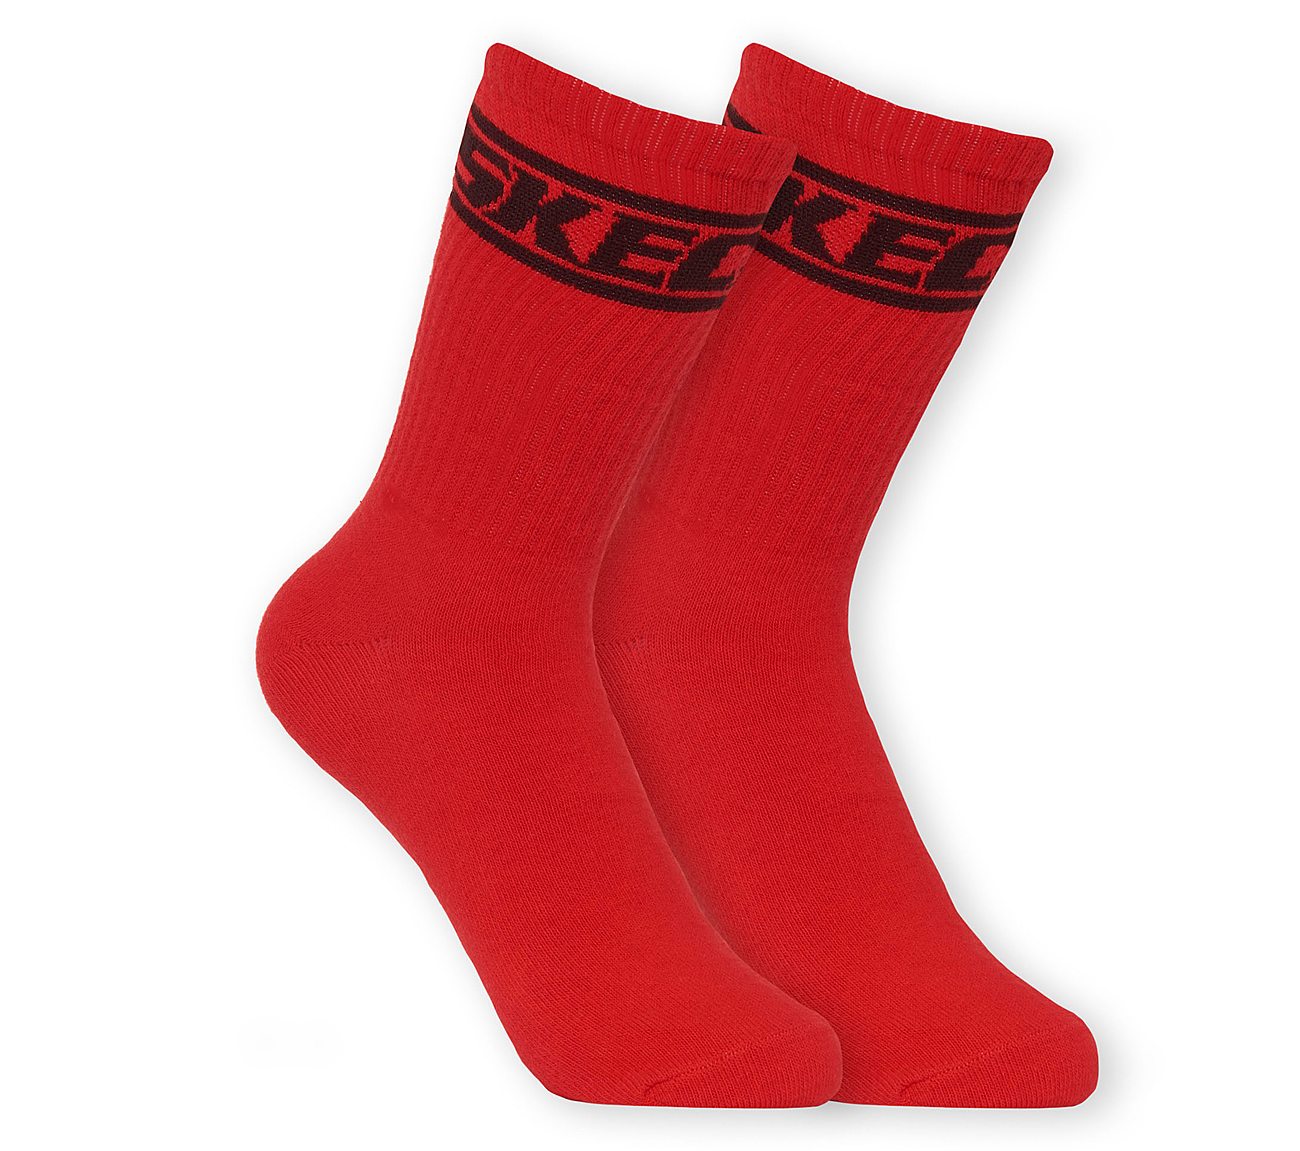 Buy SKECHERS 2 Pack Non Terry Sport Crew Socks Accessories Shoes